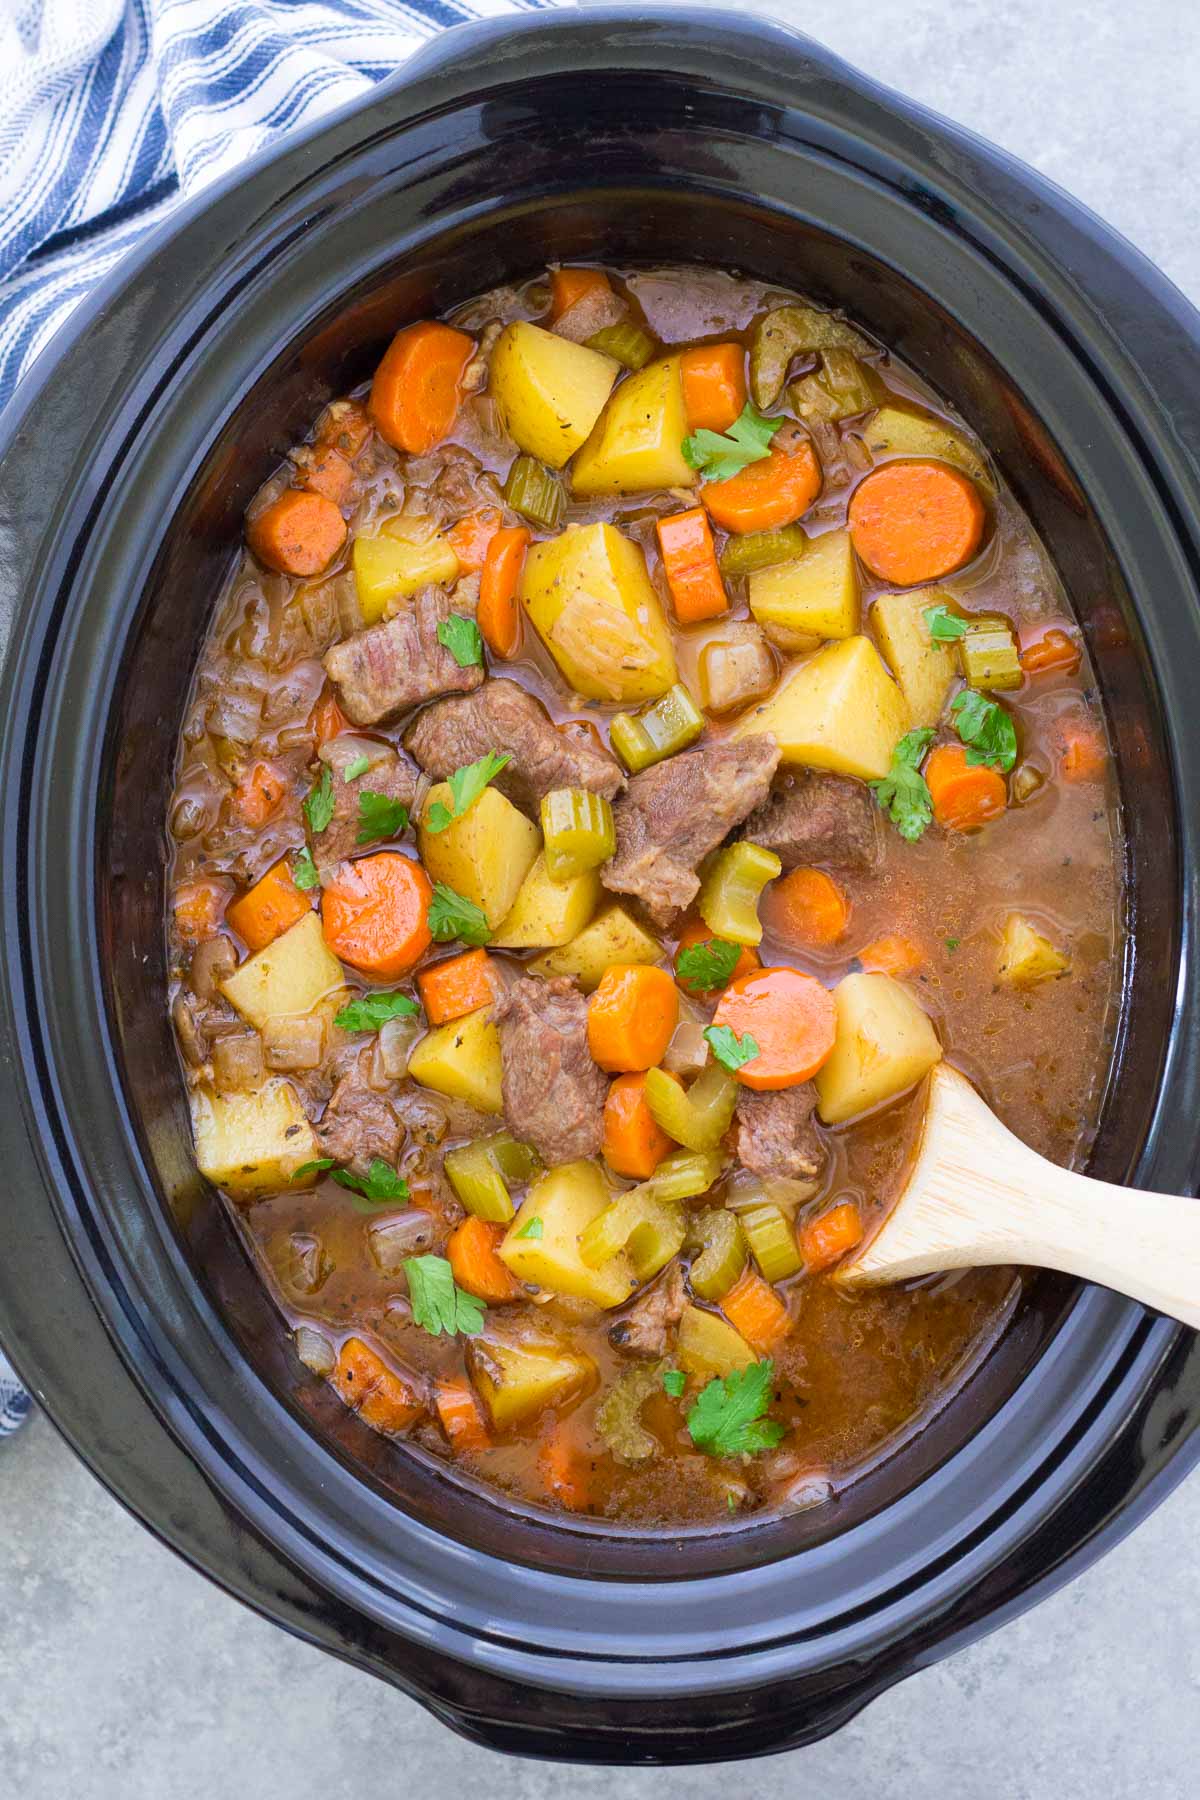 Beef stew in a slow cooker with a wooden spoon.